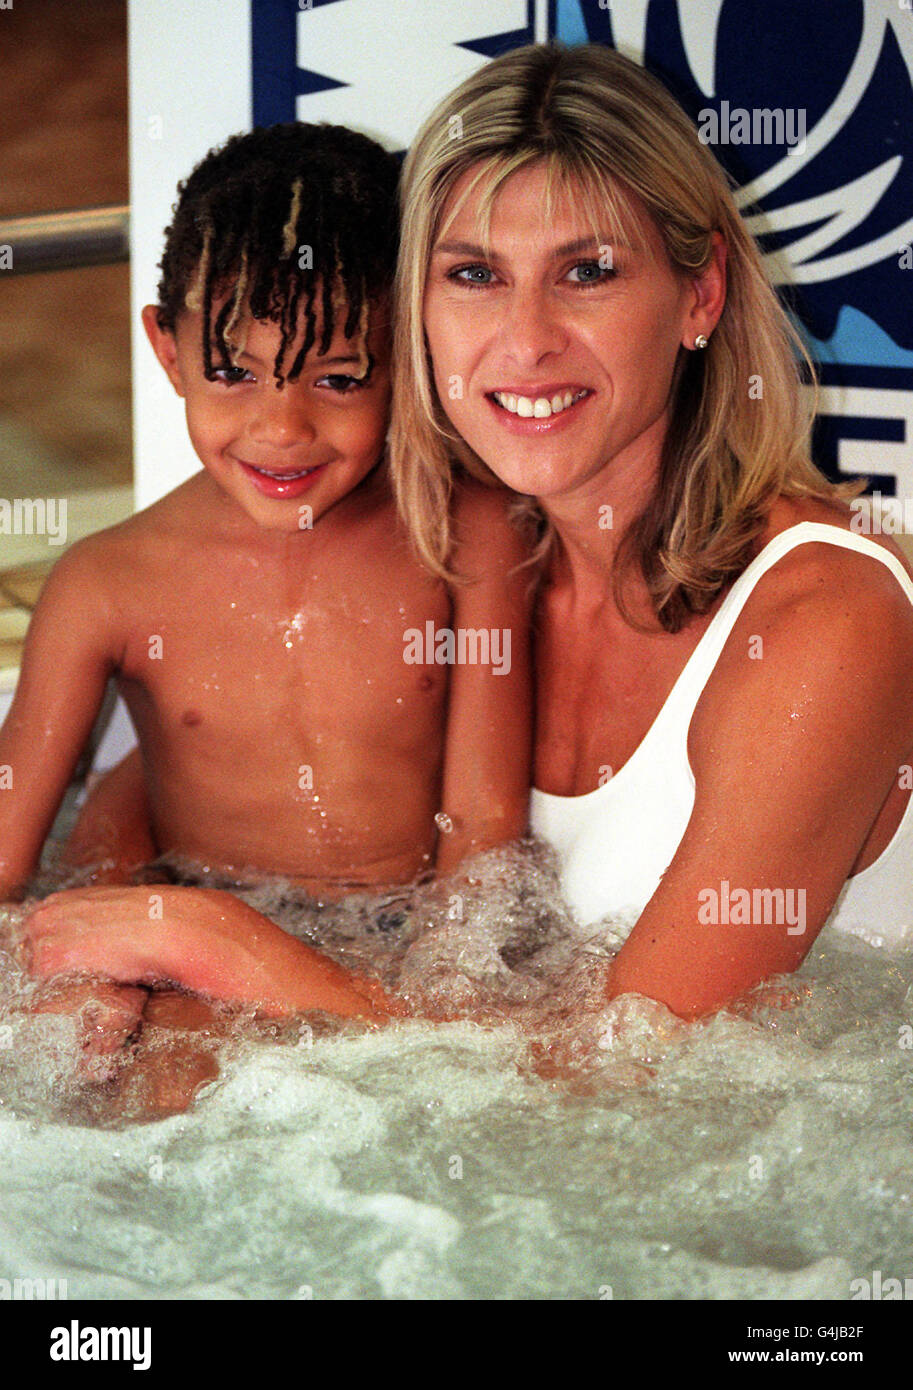 Former Olympic swimmer Sharron Davies enjoys a jacuzzi with her son Elliott at the Marriot Hotel in London's Marble Arch, at the launch of her Mile Swim Challenge in aid of the Imperial Cancer Research Fund. Stock Photo